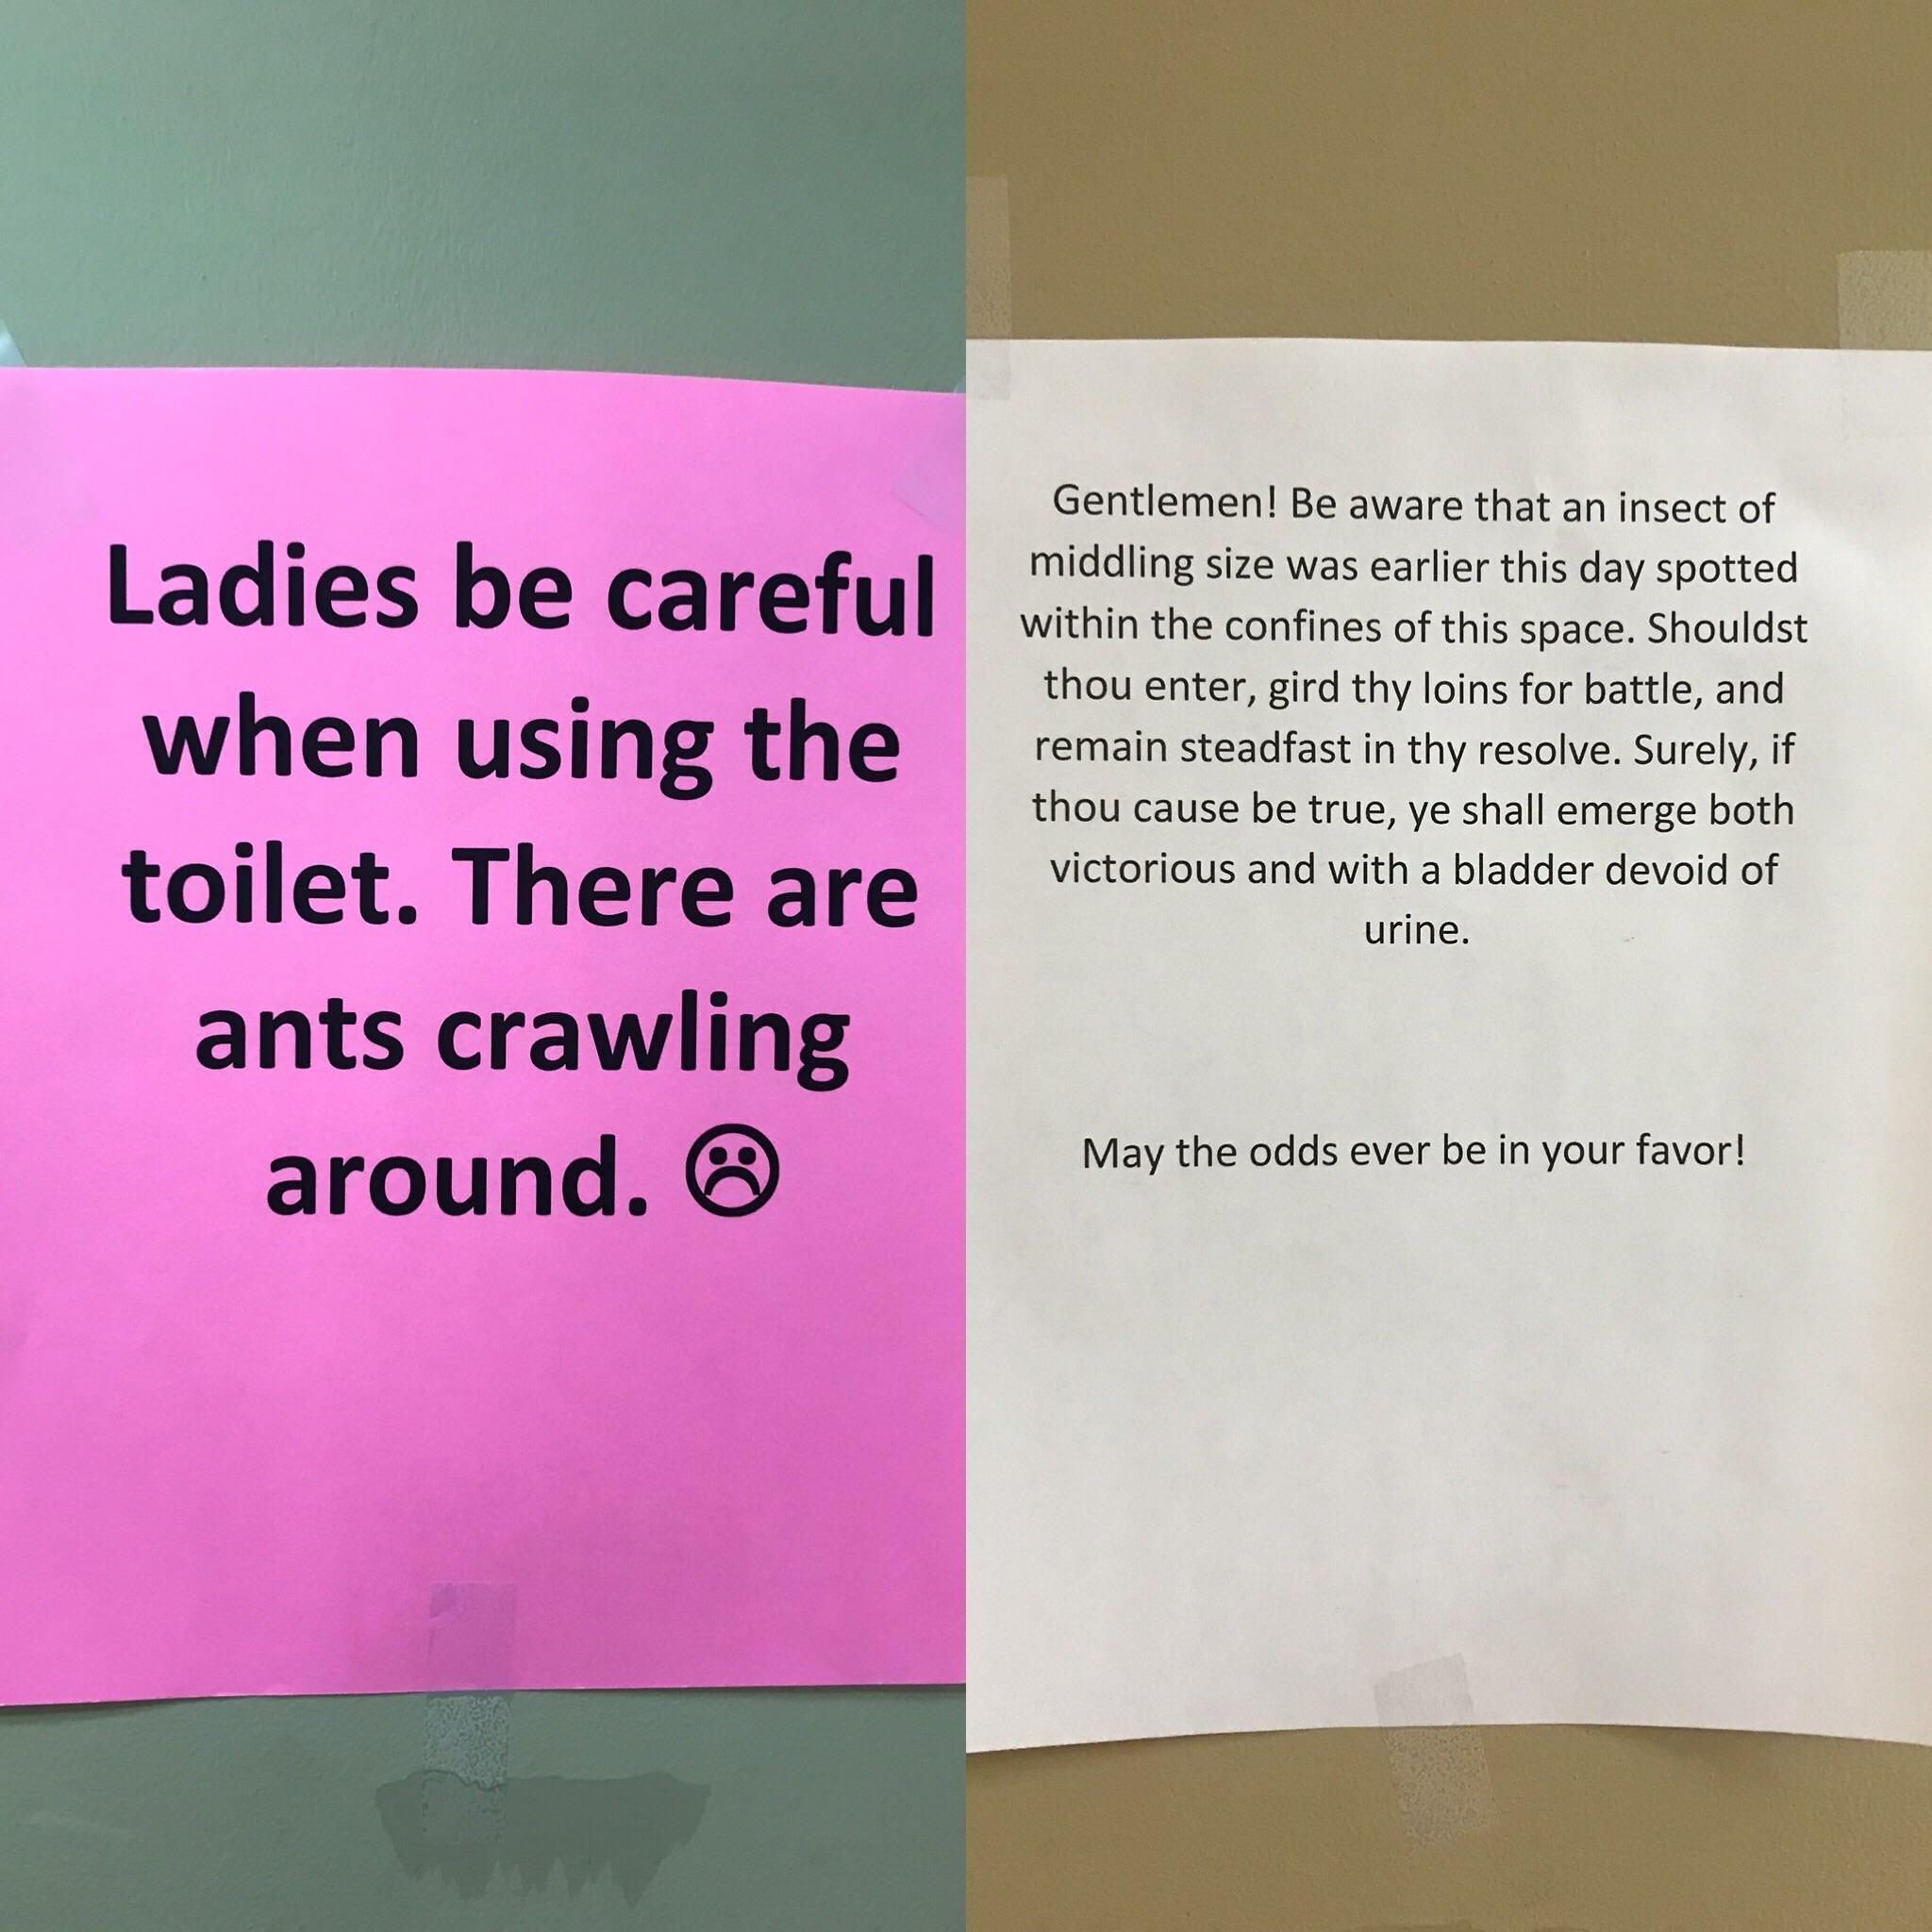 Ants were spotted in our office restrooms. The ladies put up a warning sign on their door, so I responded in kind.